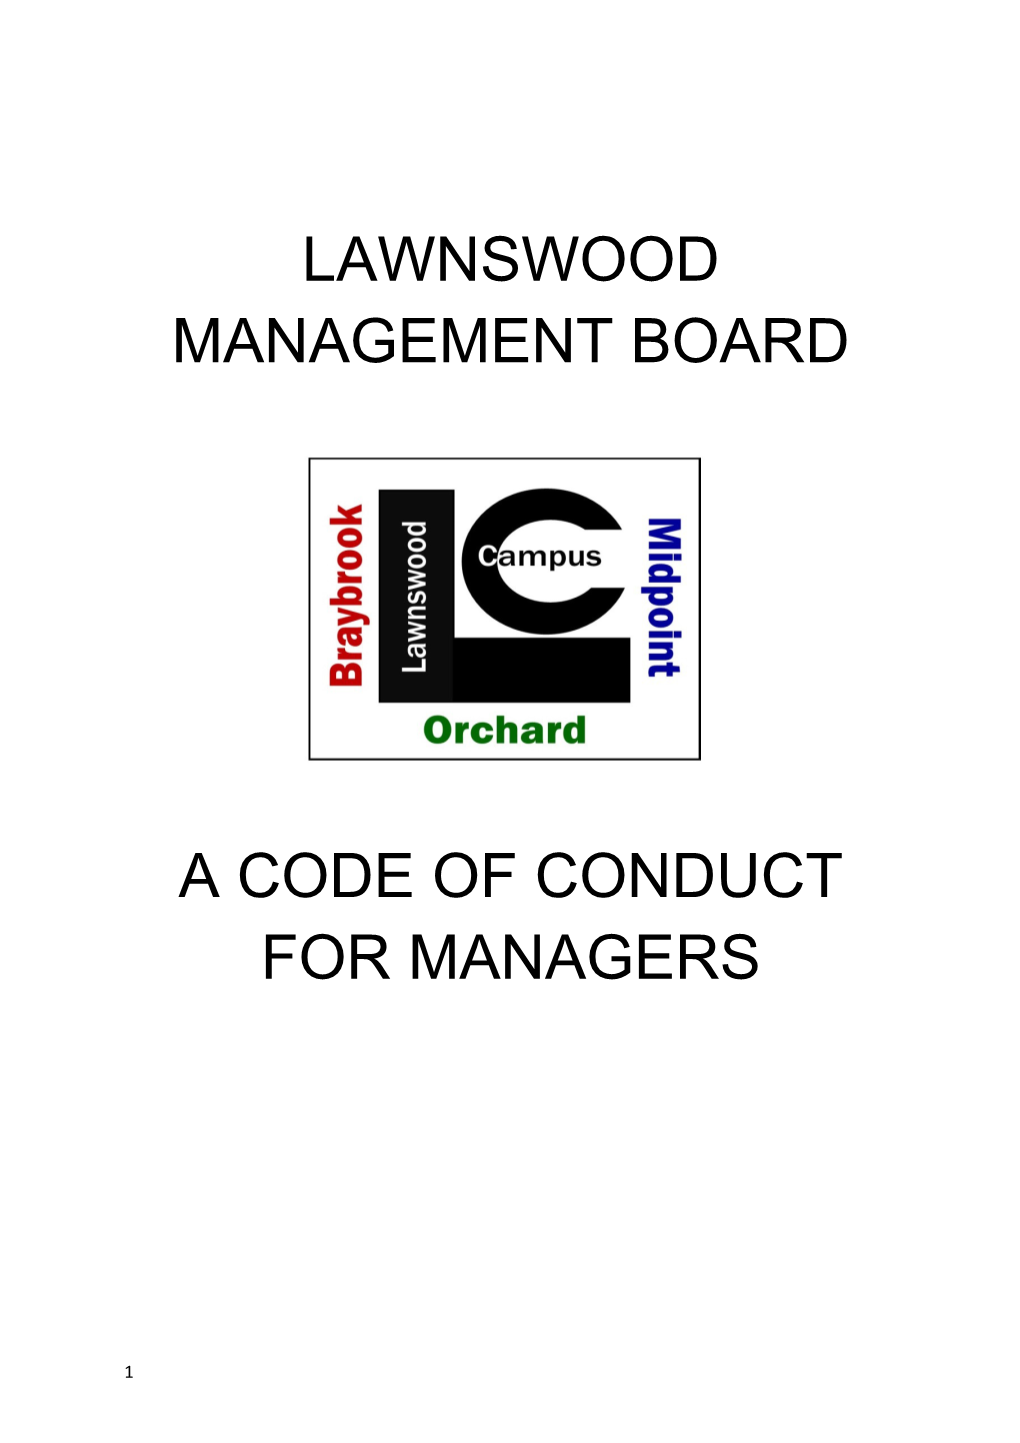 The Management Board Has the Following Core Strategic Functions